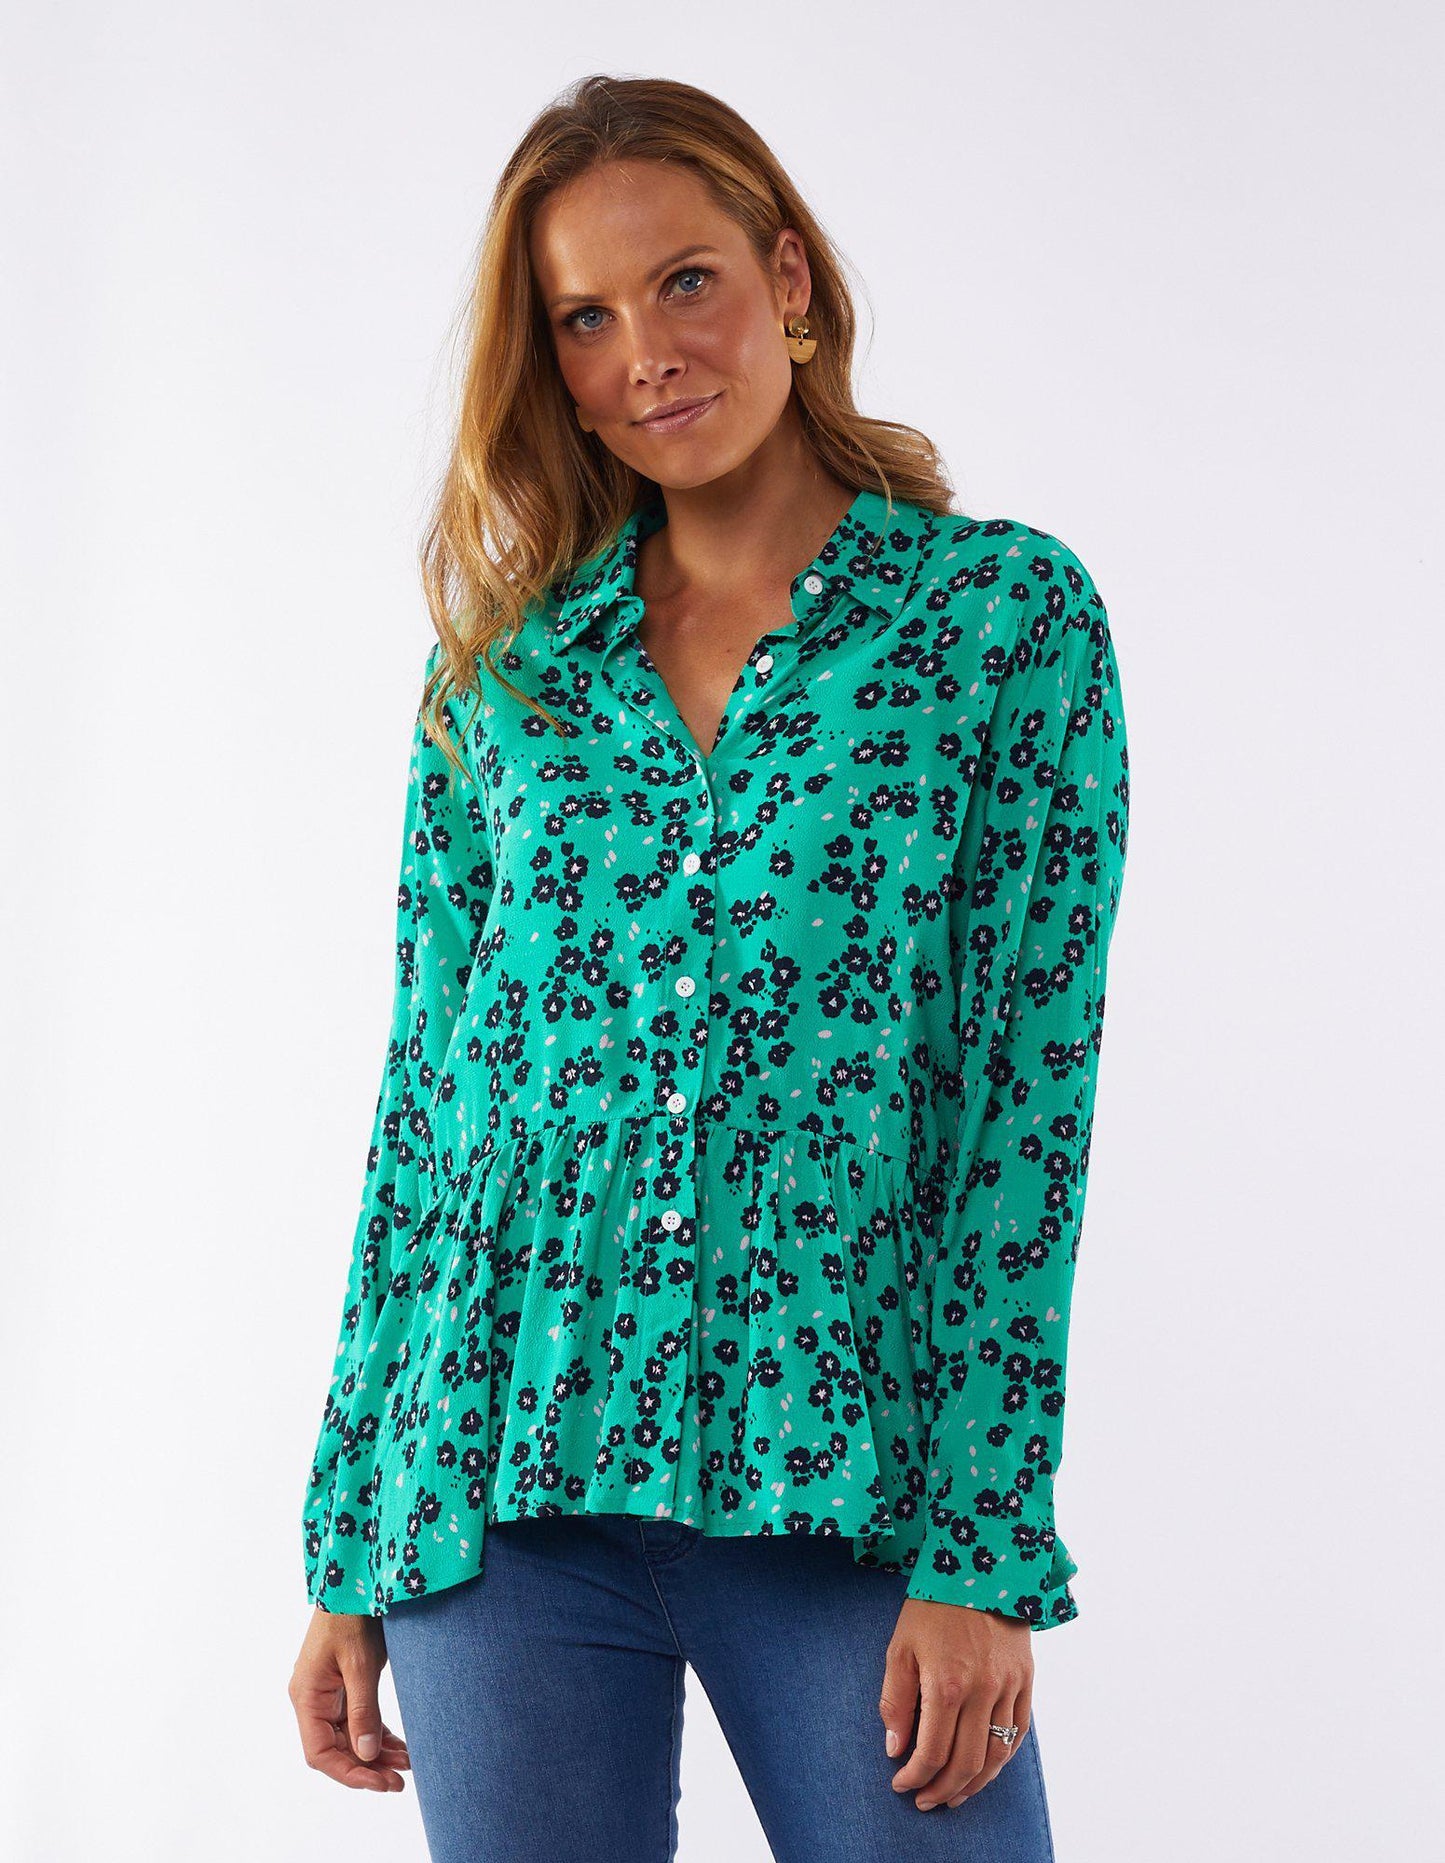 Eloise Floral Shirt - Green Floral - FUDGE Gifts Home Lifestyle